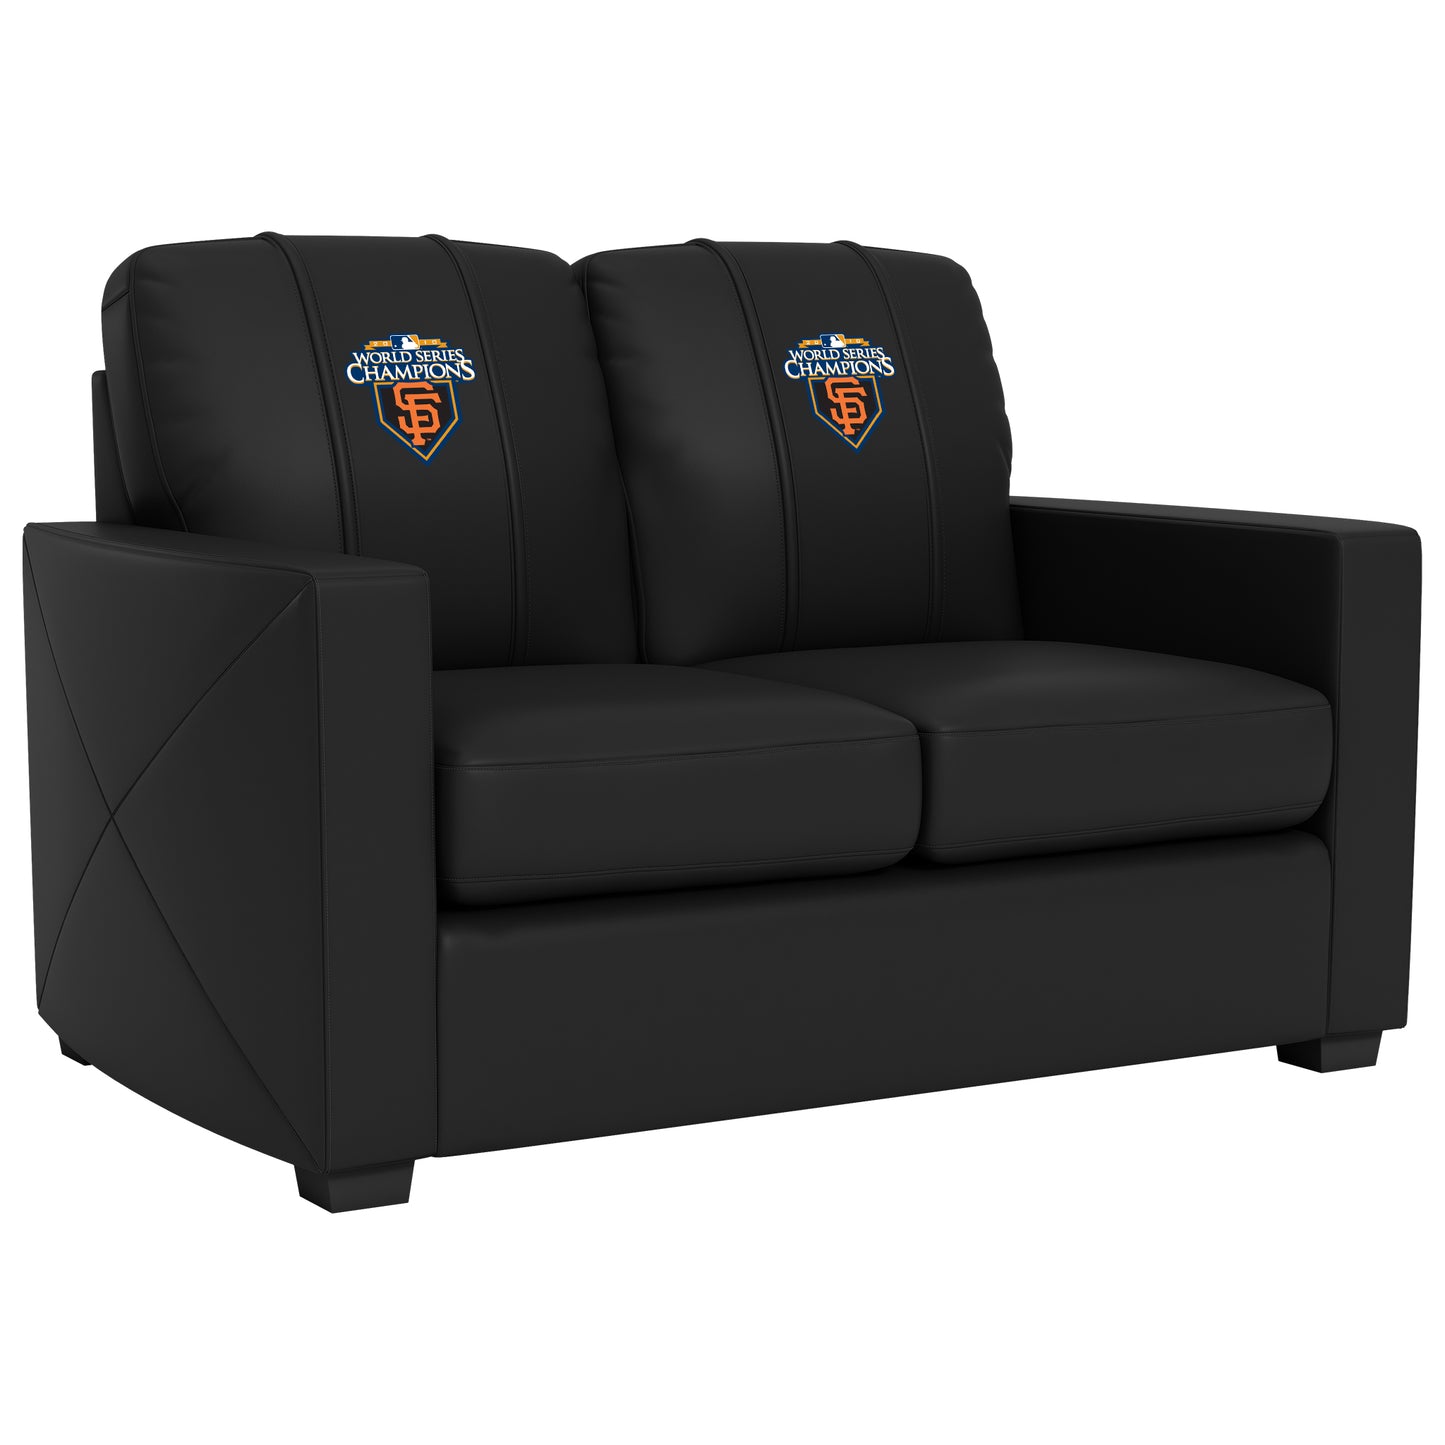 Silver Loveseat with San Francisco Giants Champs'10